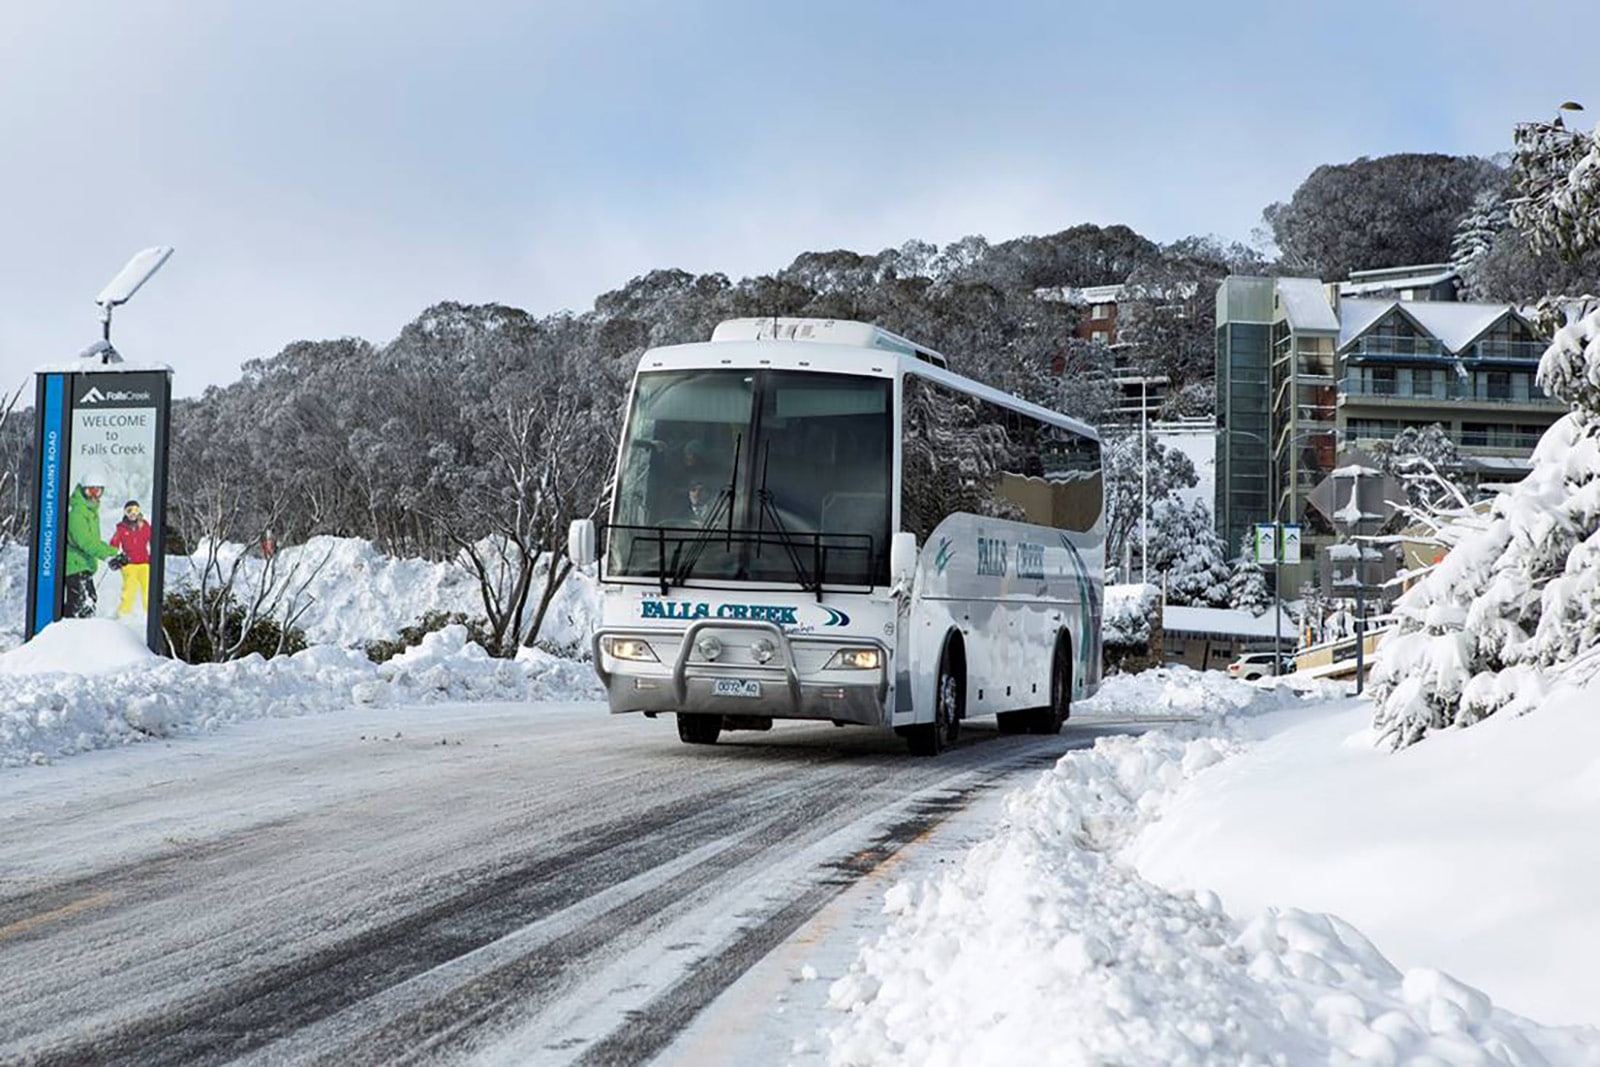 Bus in the snow at Falls Creek